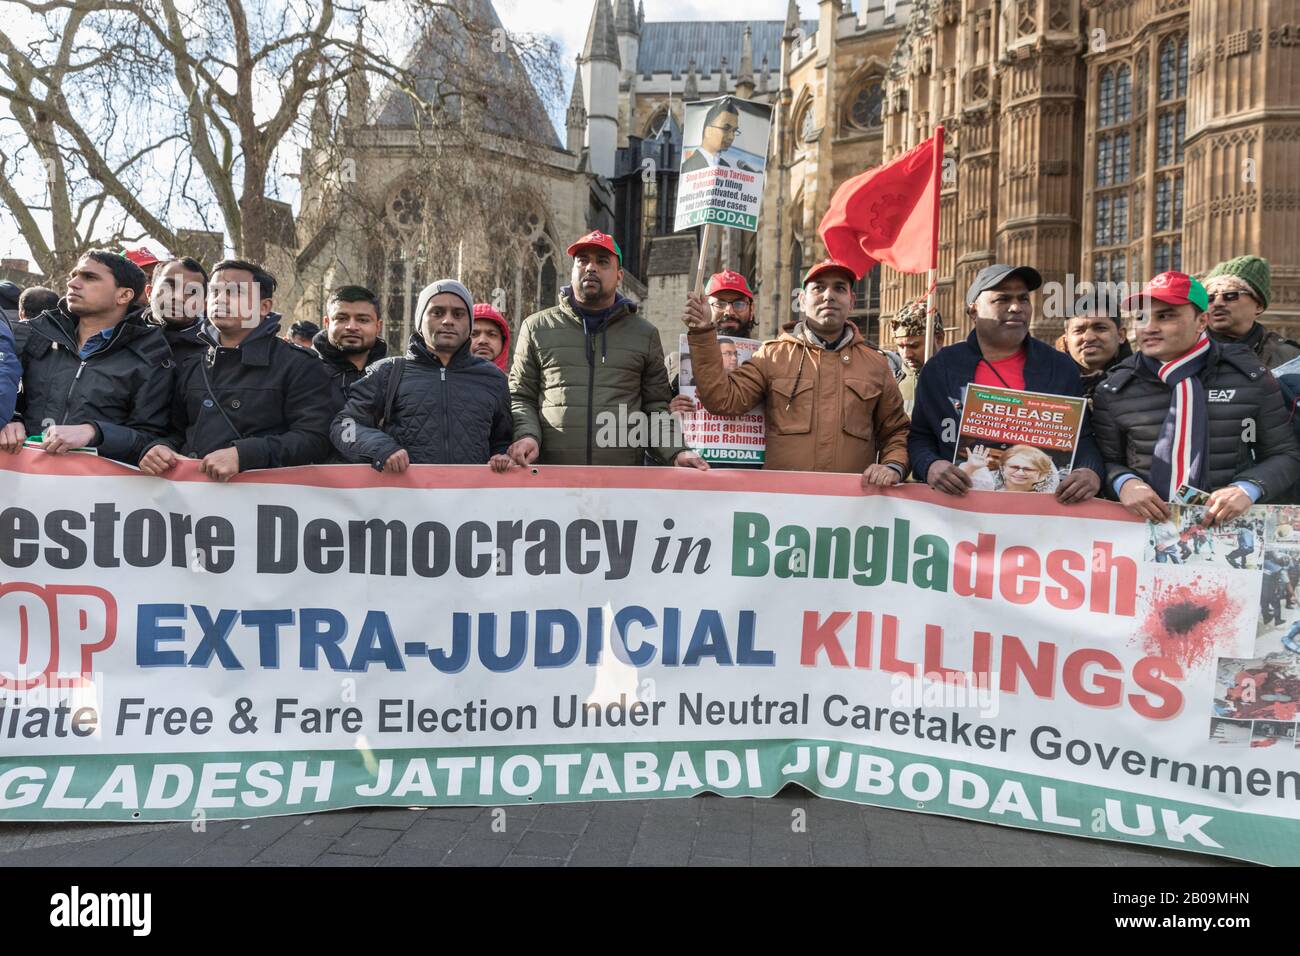 Protesters from Bangladesh Nationalist Party and Jatiyatabadi Jubo Dal youth wing, protest in Westminster, London, UK Stock Photo